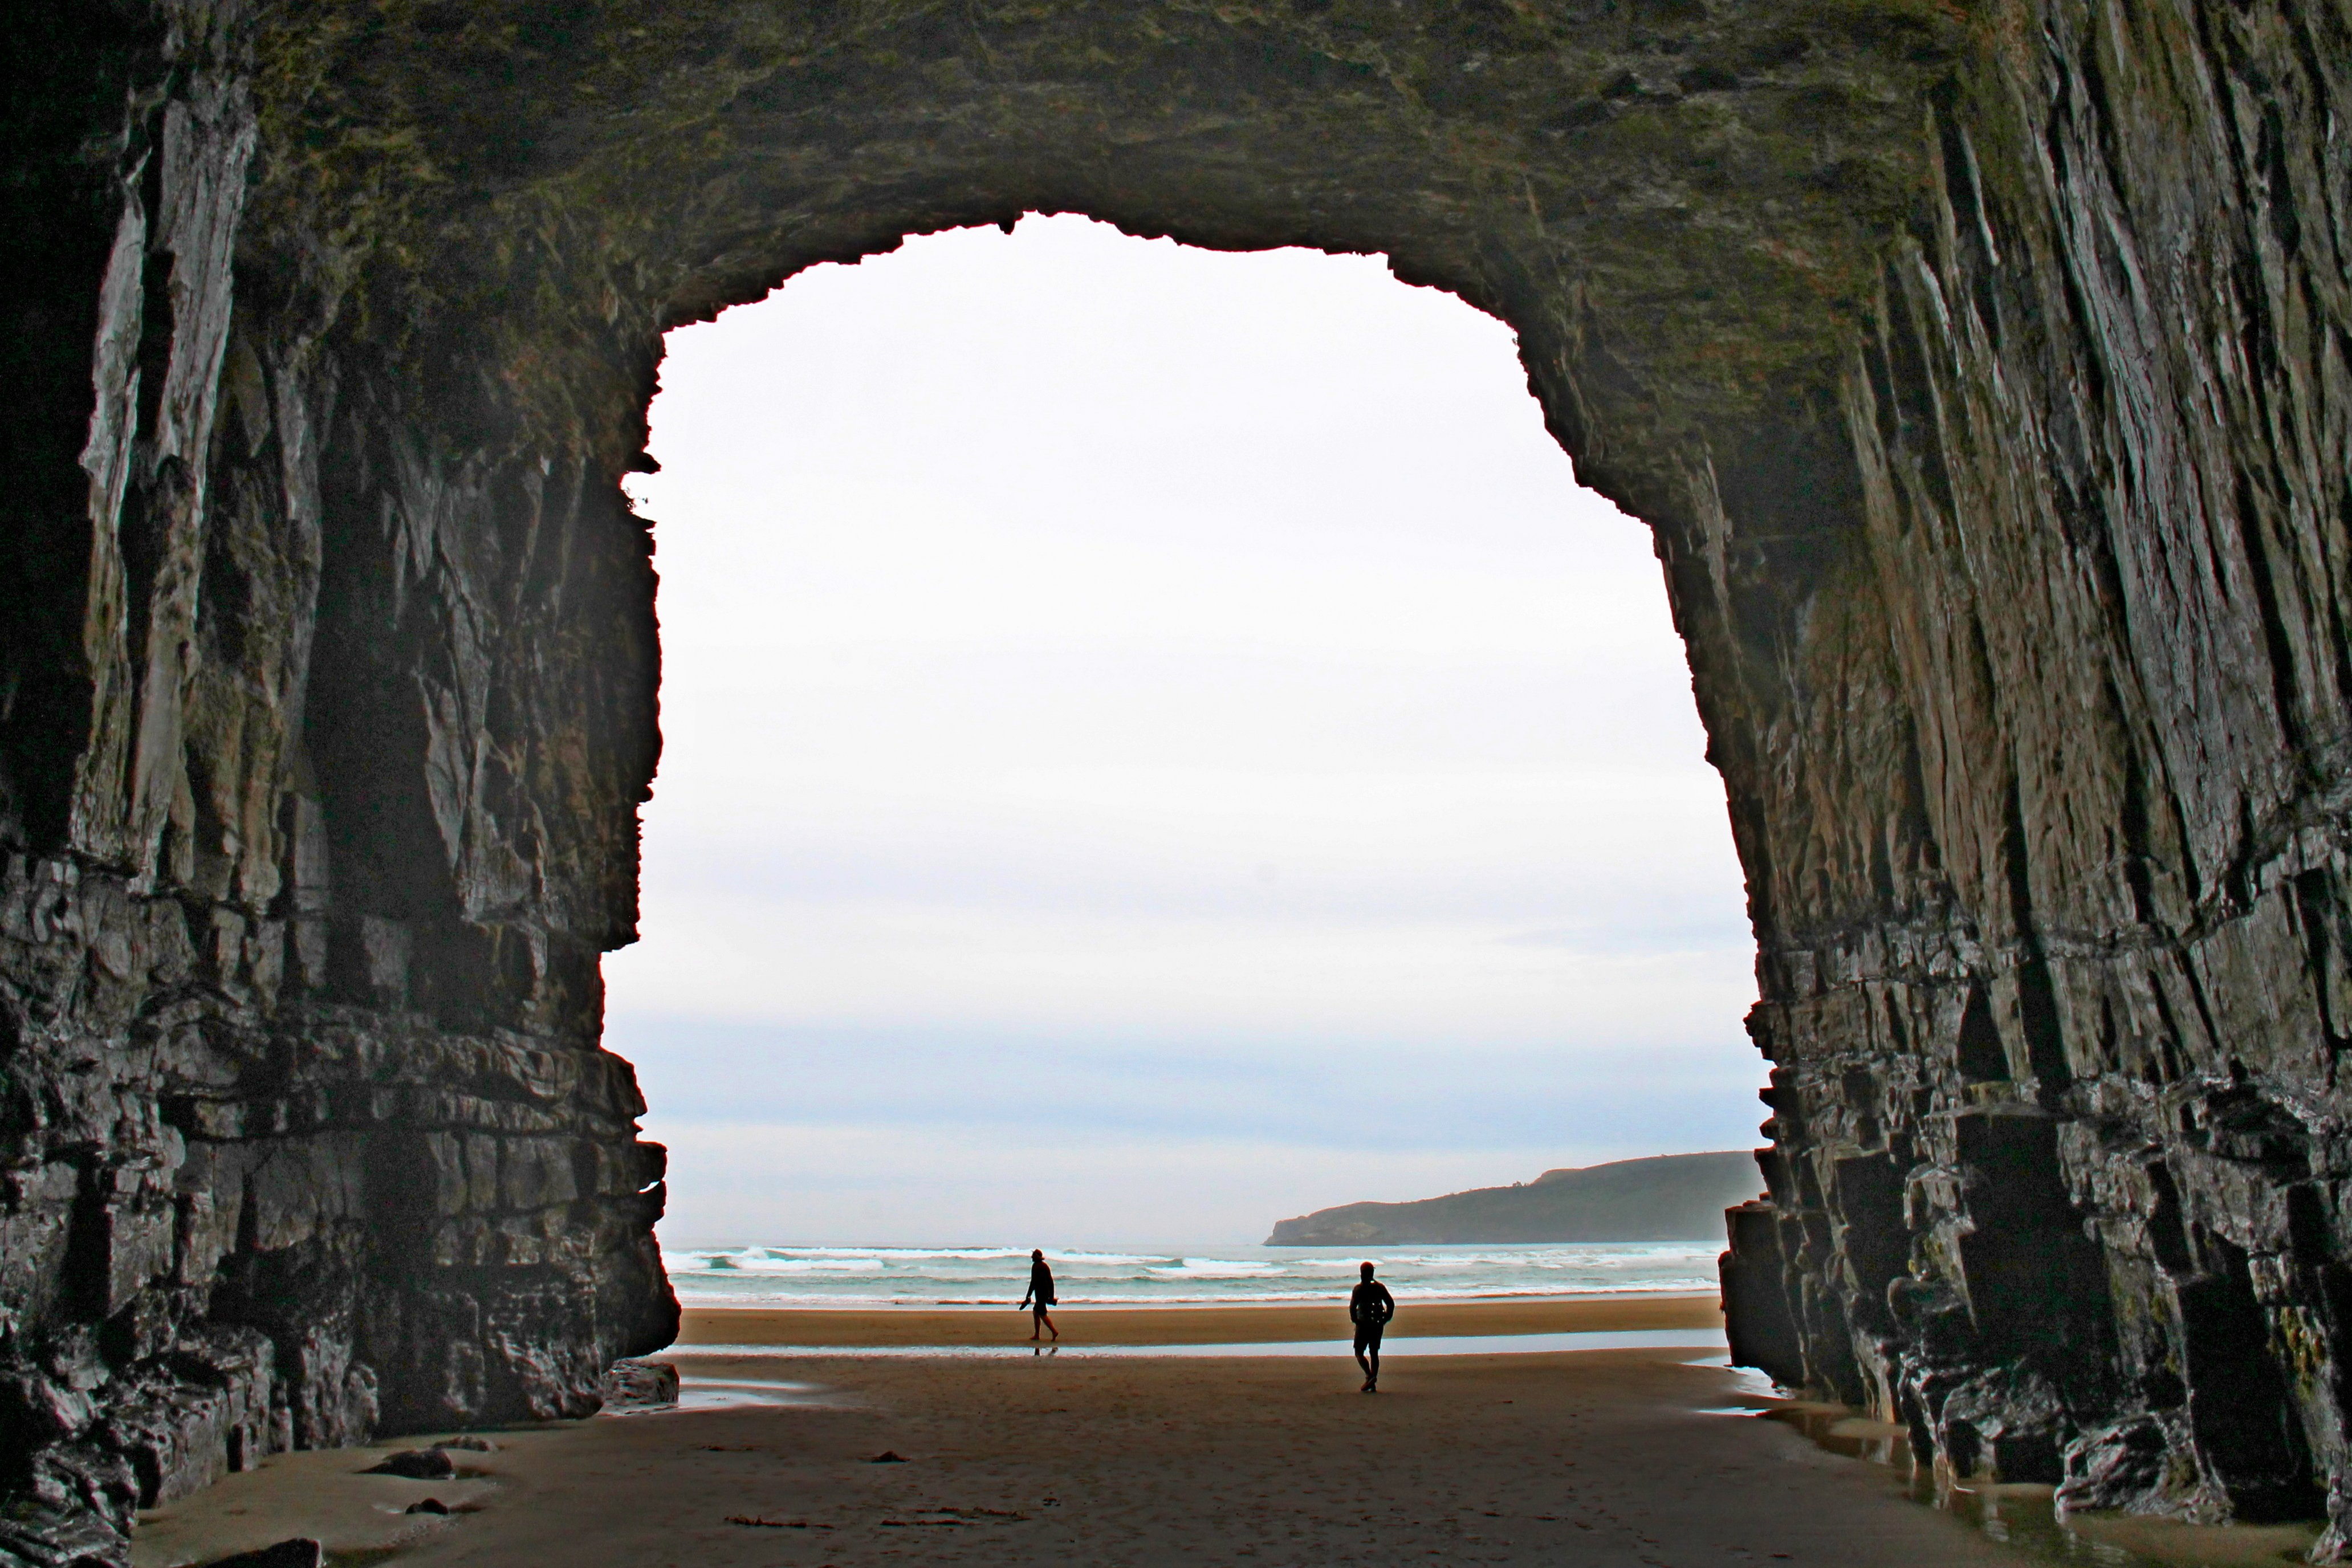 The east entrance of the caves in its grandeur. Photo: Nick Brook